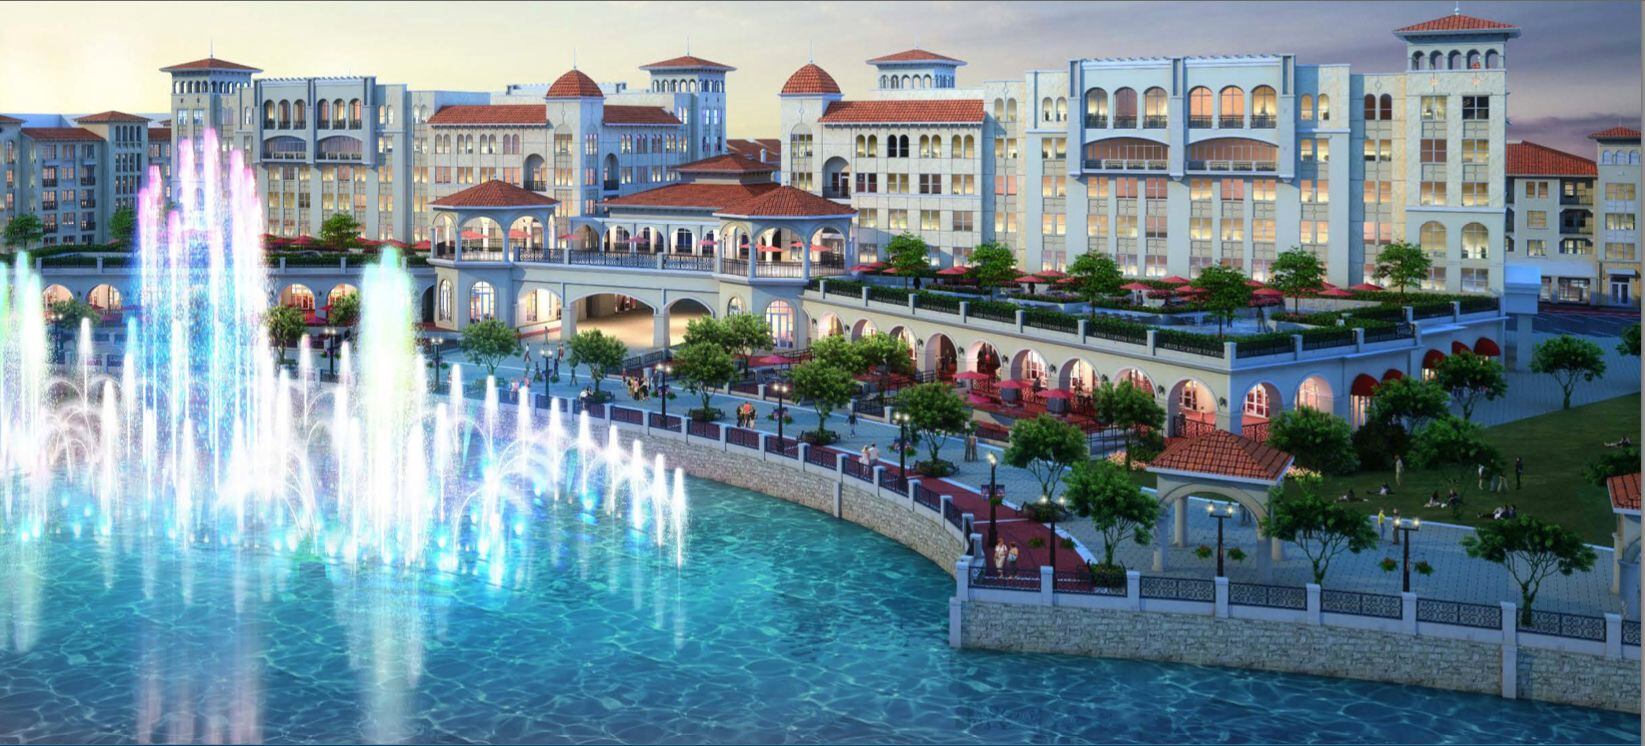 The $1 billion Bayside development on I-30 in Rowlett includes a fountain that the...